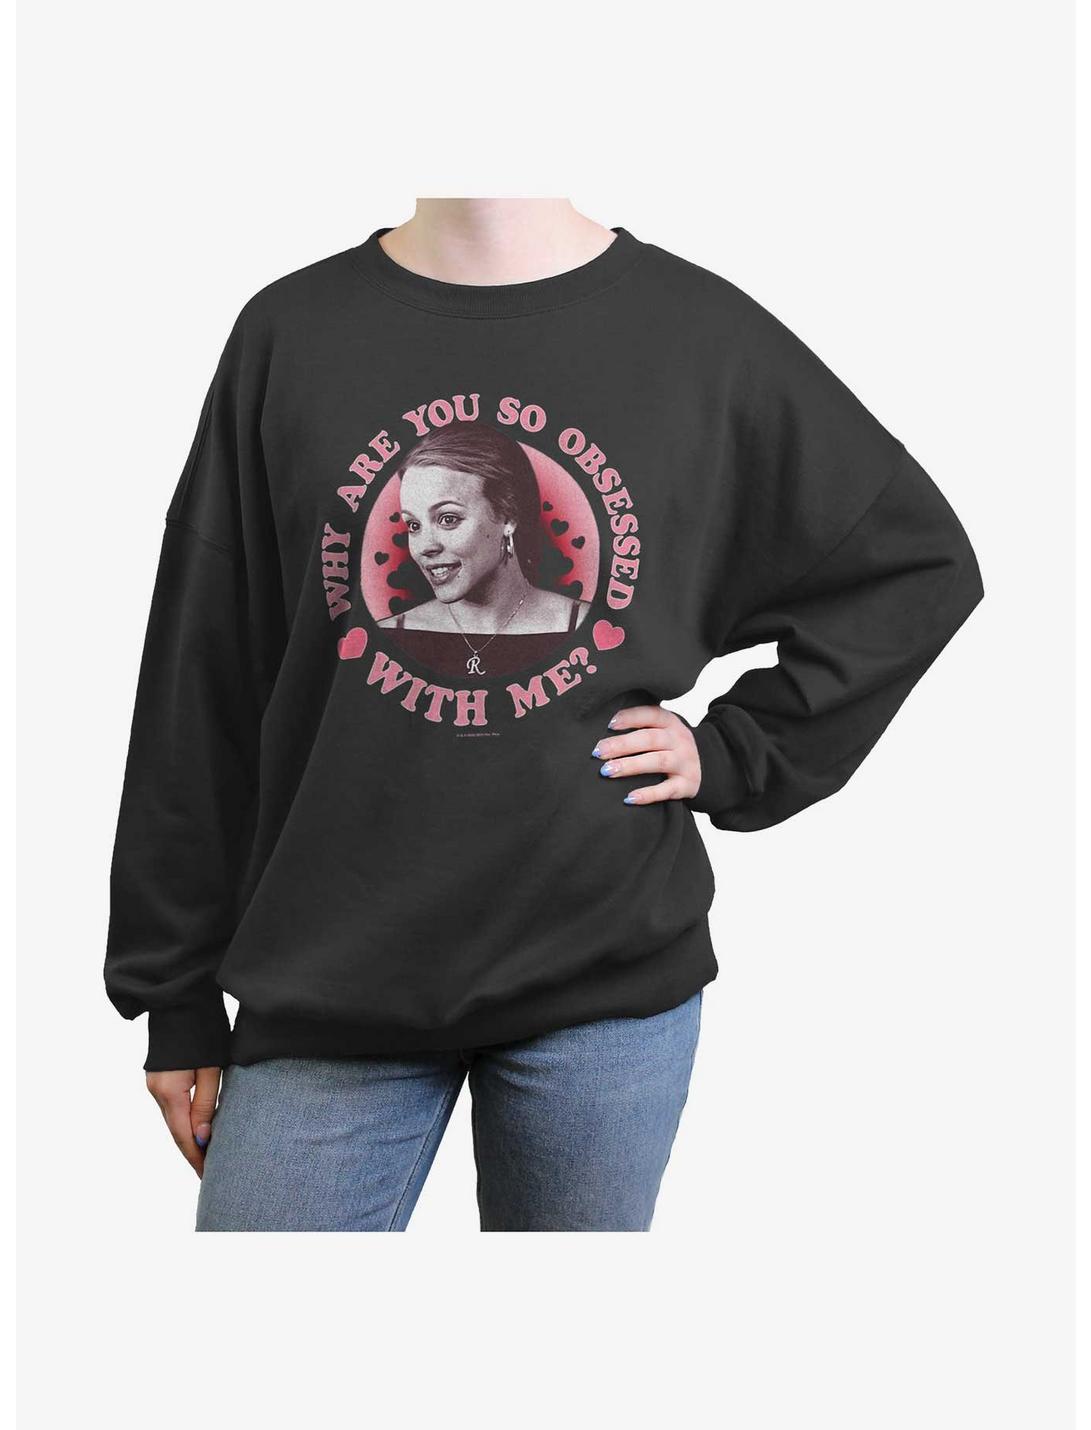 Mean Girls Obsessed With Me Womens Oversized Sweatshirt, CHARCOAL, hi-res